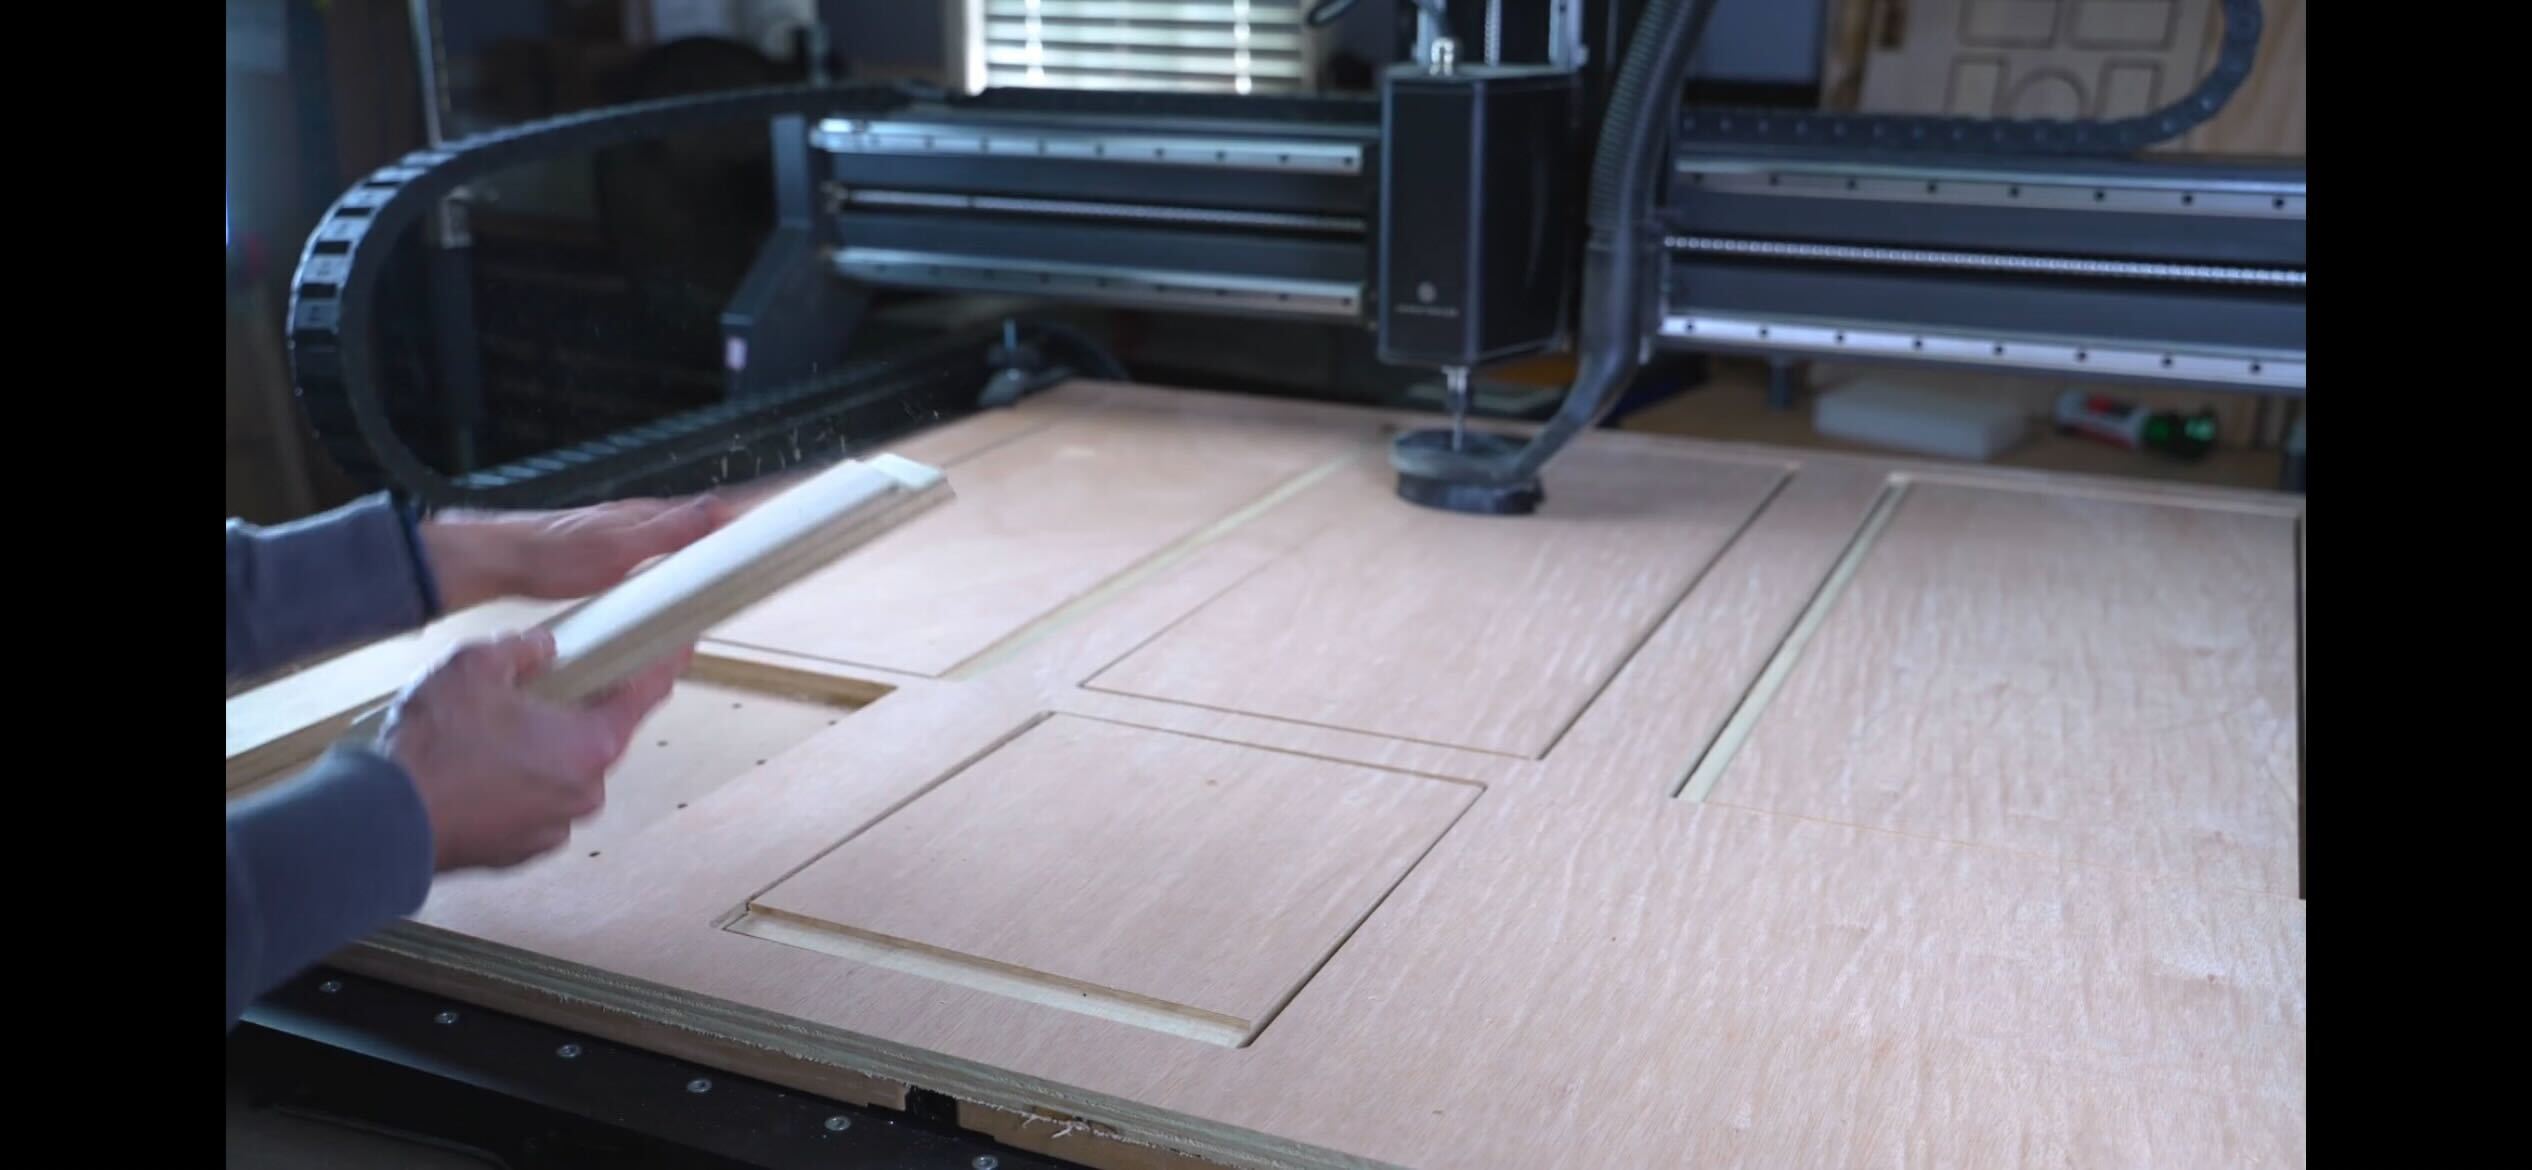 World's Easiest CNC System for Machining | Inventables